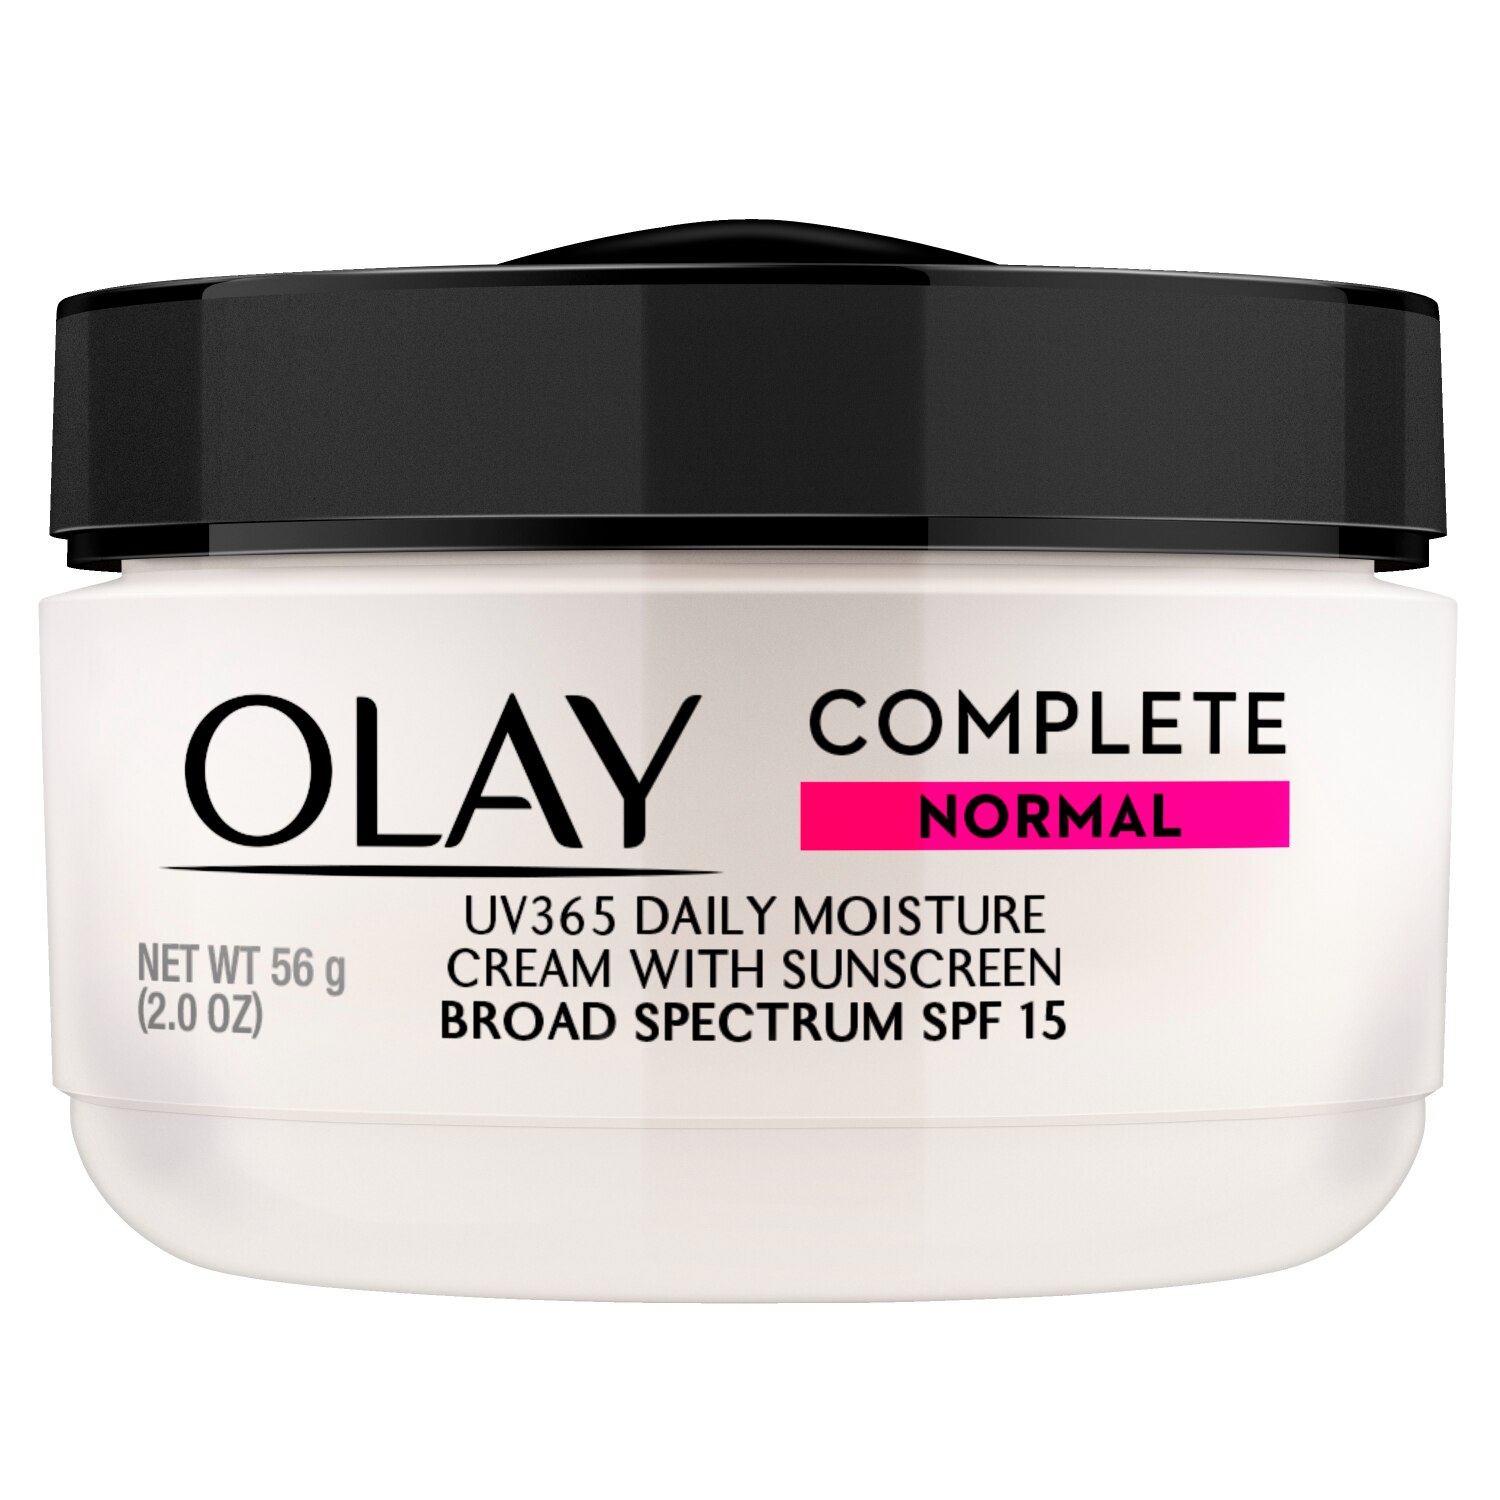 Olay Complete Lotion Moisturizer With SPF 15 For Normal Skin, 4 Oz , CVS